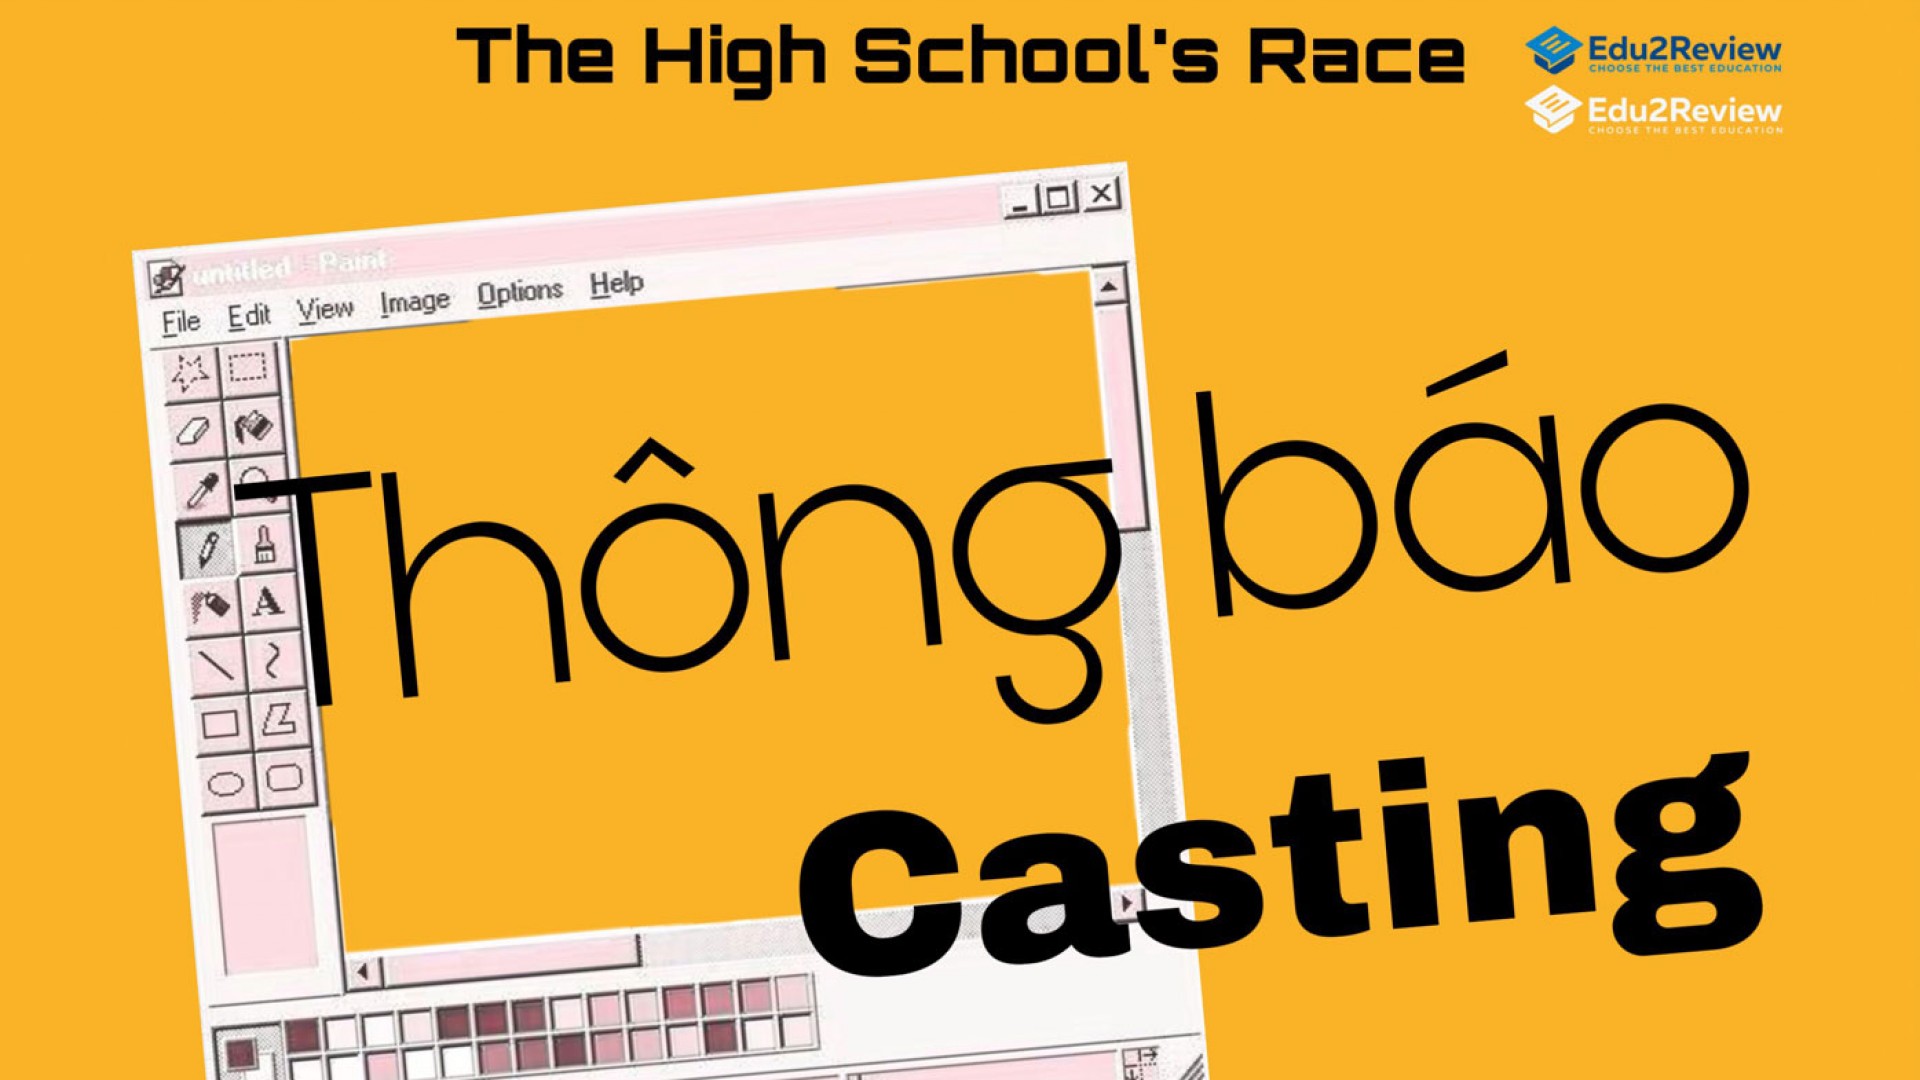 CASTING ONLINE - THE HIGH SCHOOL’S RACE 2019